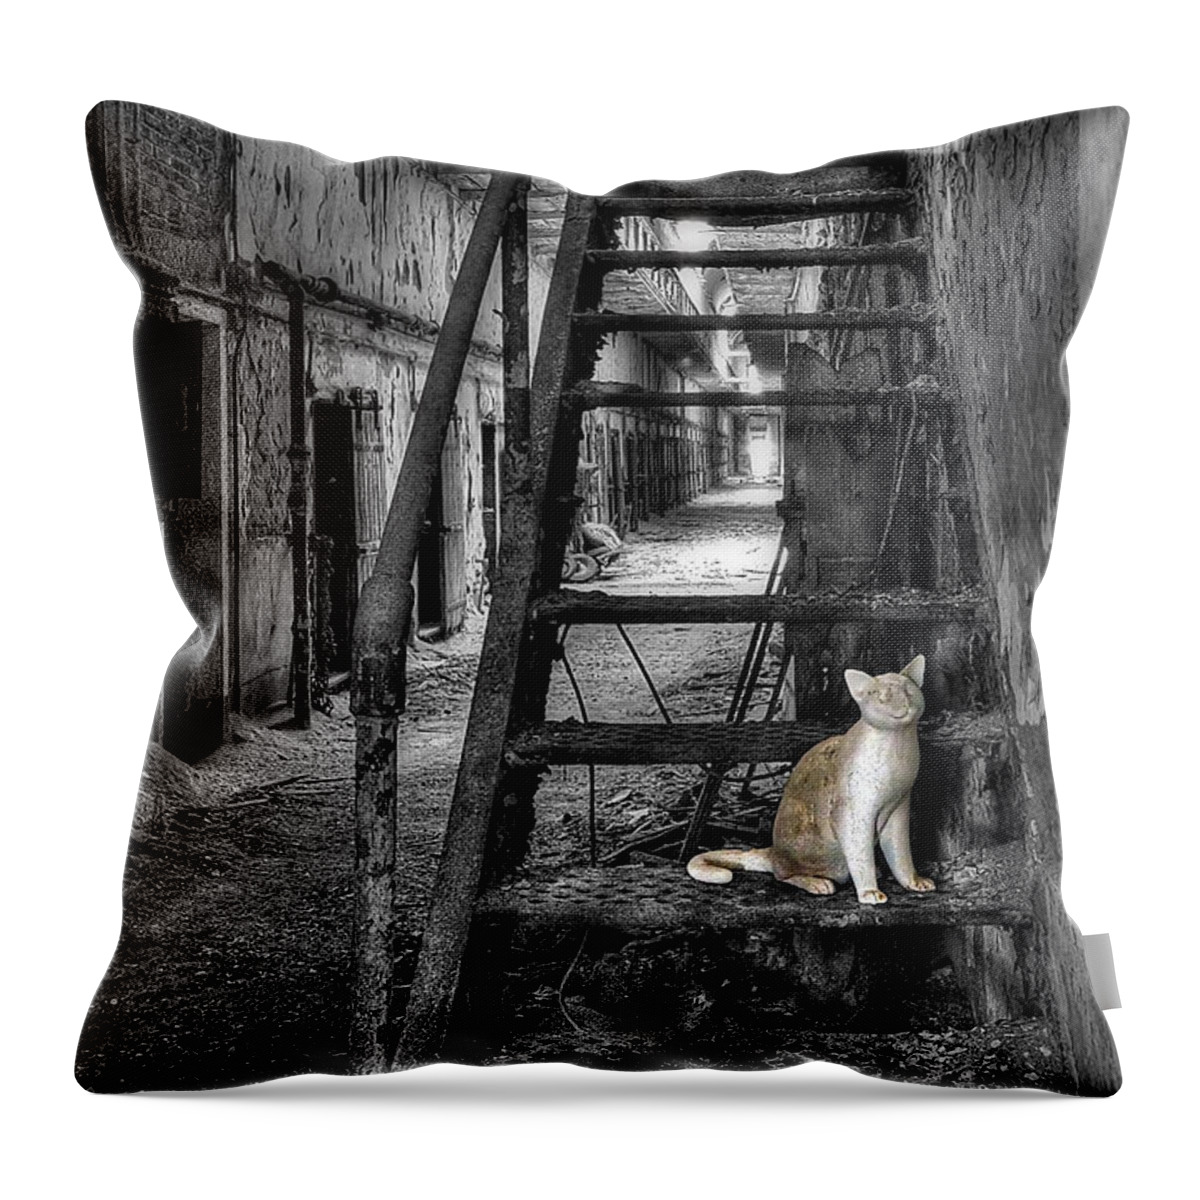 Abandoned Throw Pillow featuring the photograph Here Kitty Kitty Kitty... by Evelina Kremsdorf